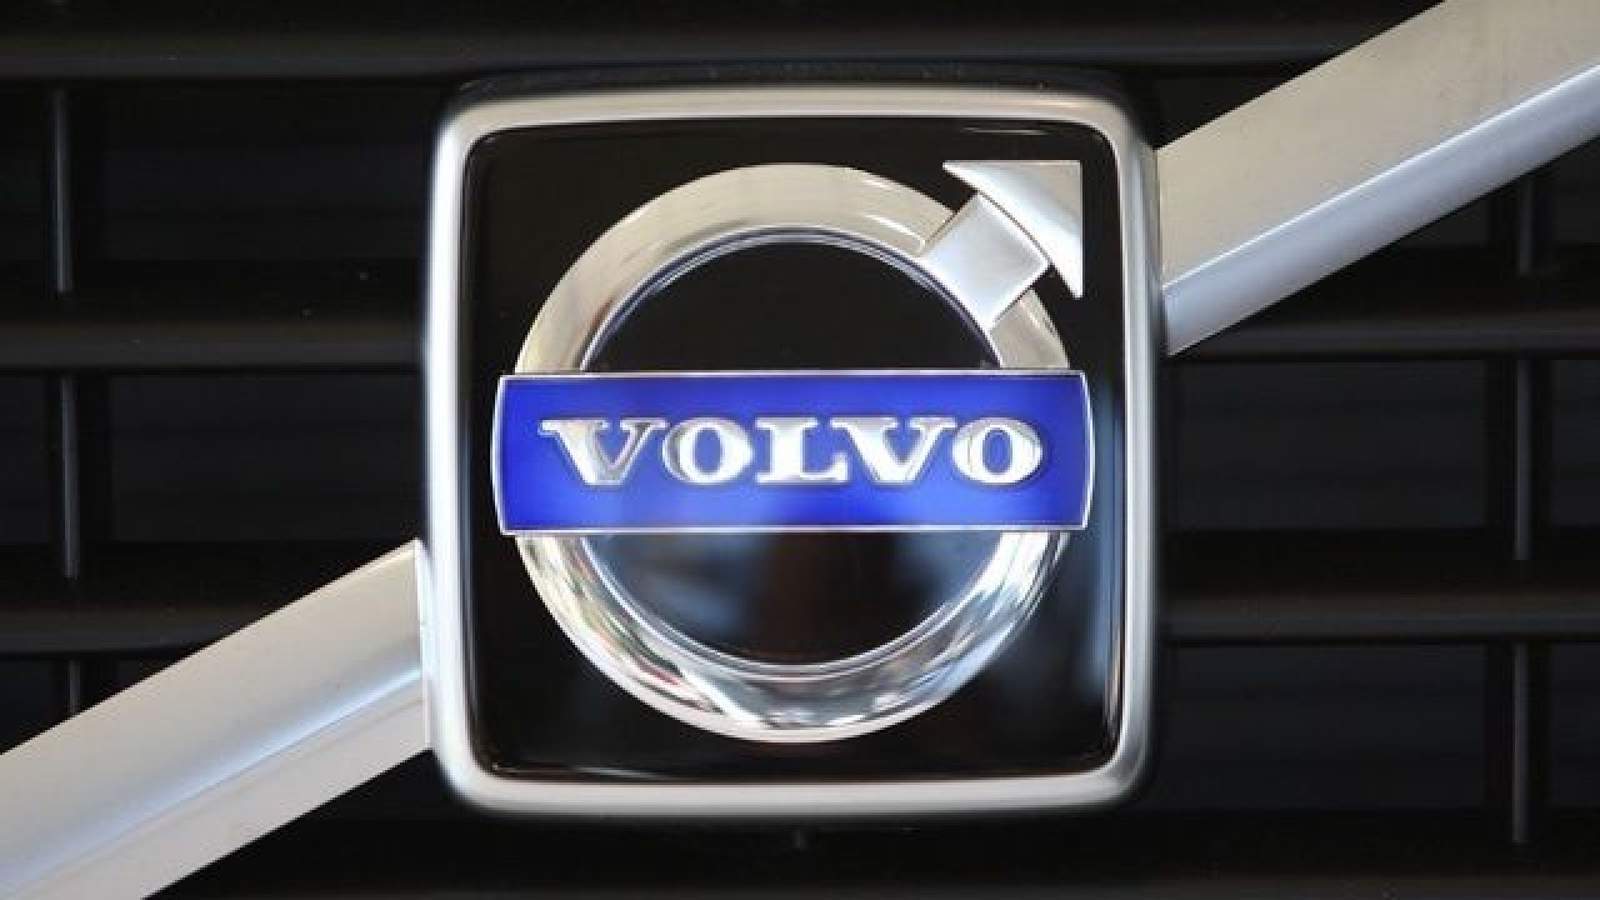 Volvo to lay off around 700 employees at Dublin plant